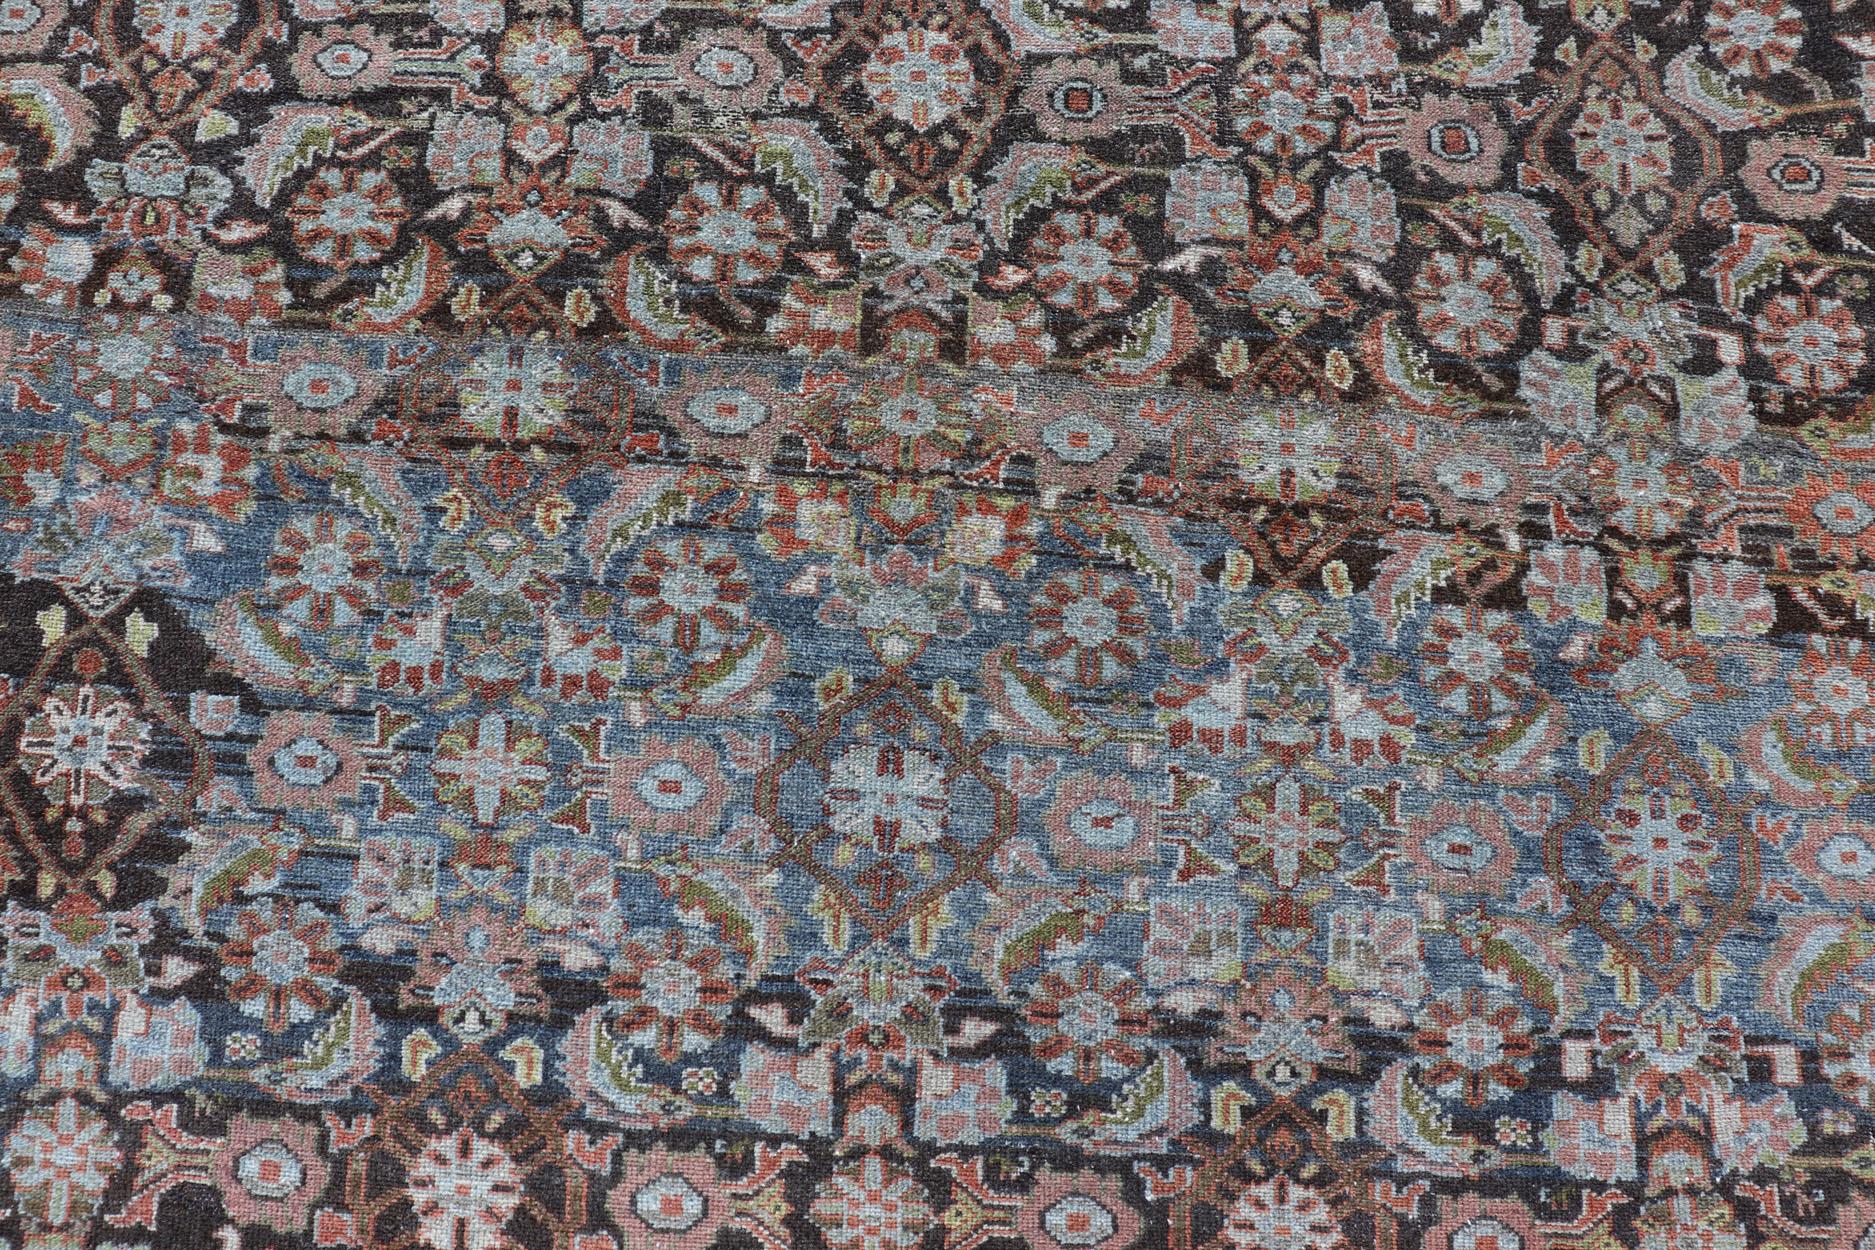 Antique Persian Malayer Rug in Variegated Charcoal, Brown, Green and Blue In Good Condition For Sale In Atlanta, GA